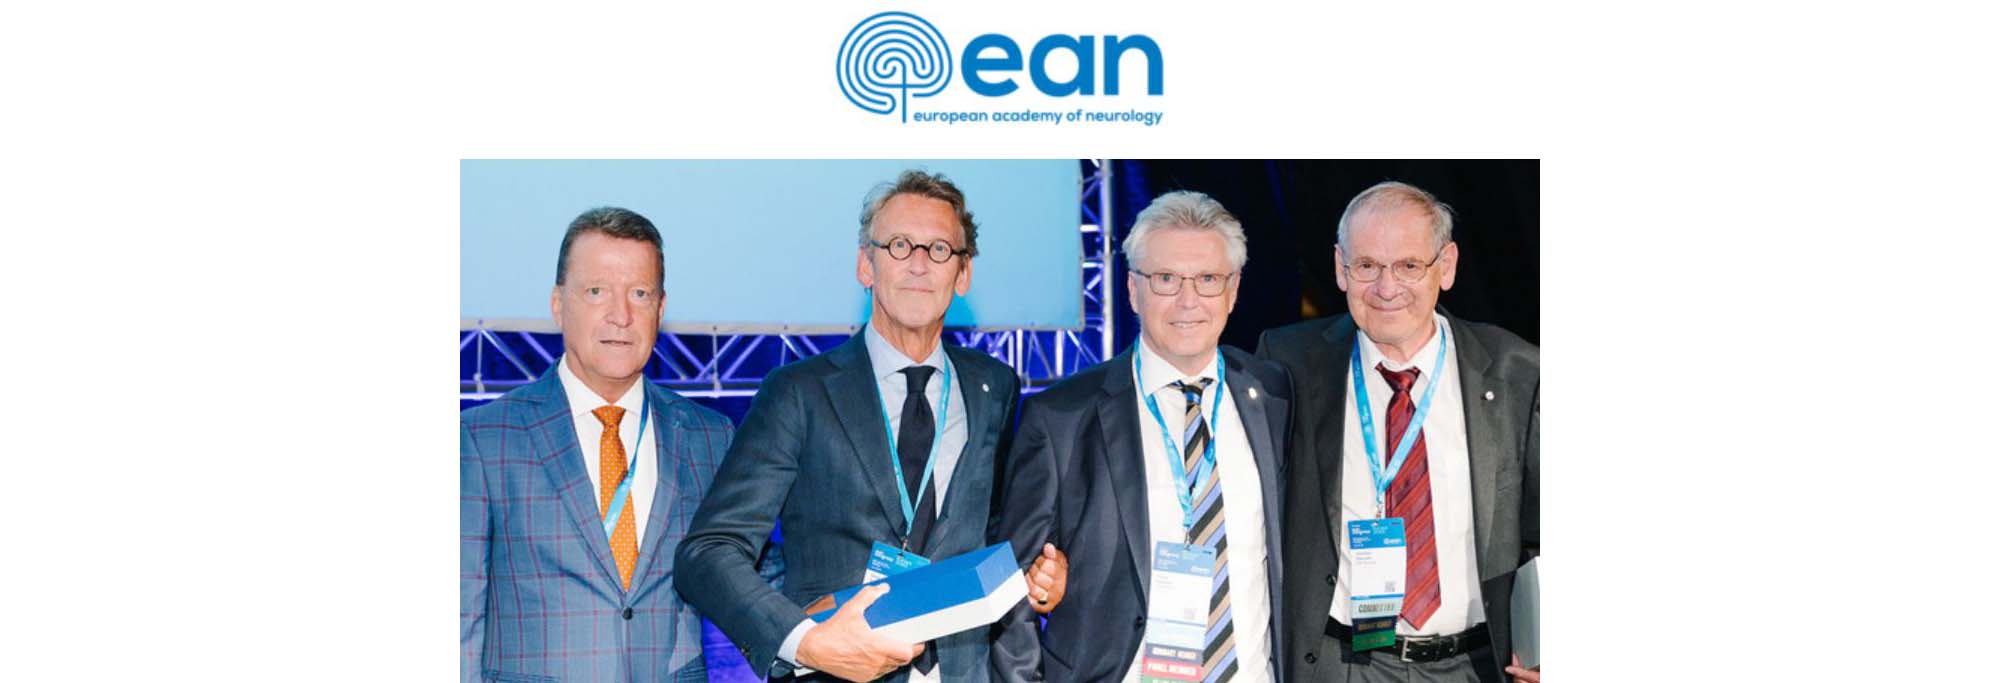 Philip Scheltens is awarded at EAN congres